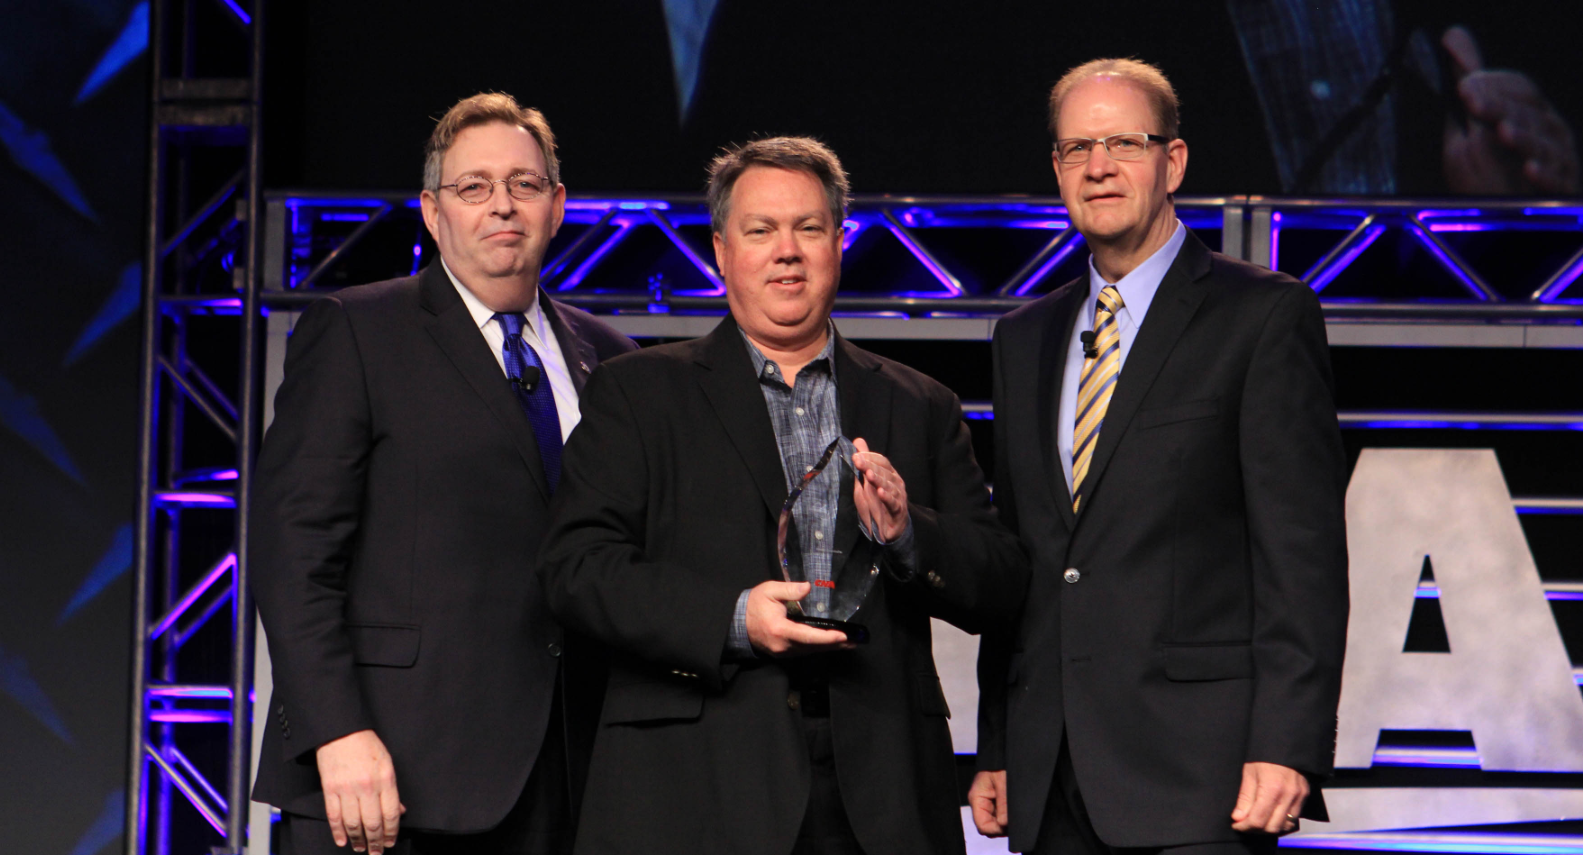 three men in suits holding a glass award for safety